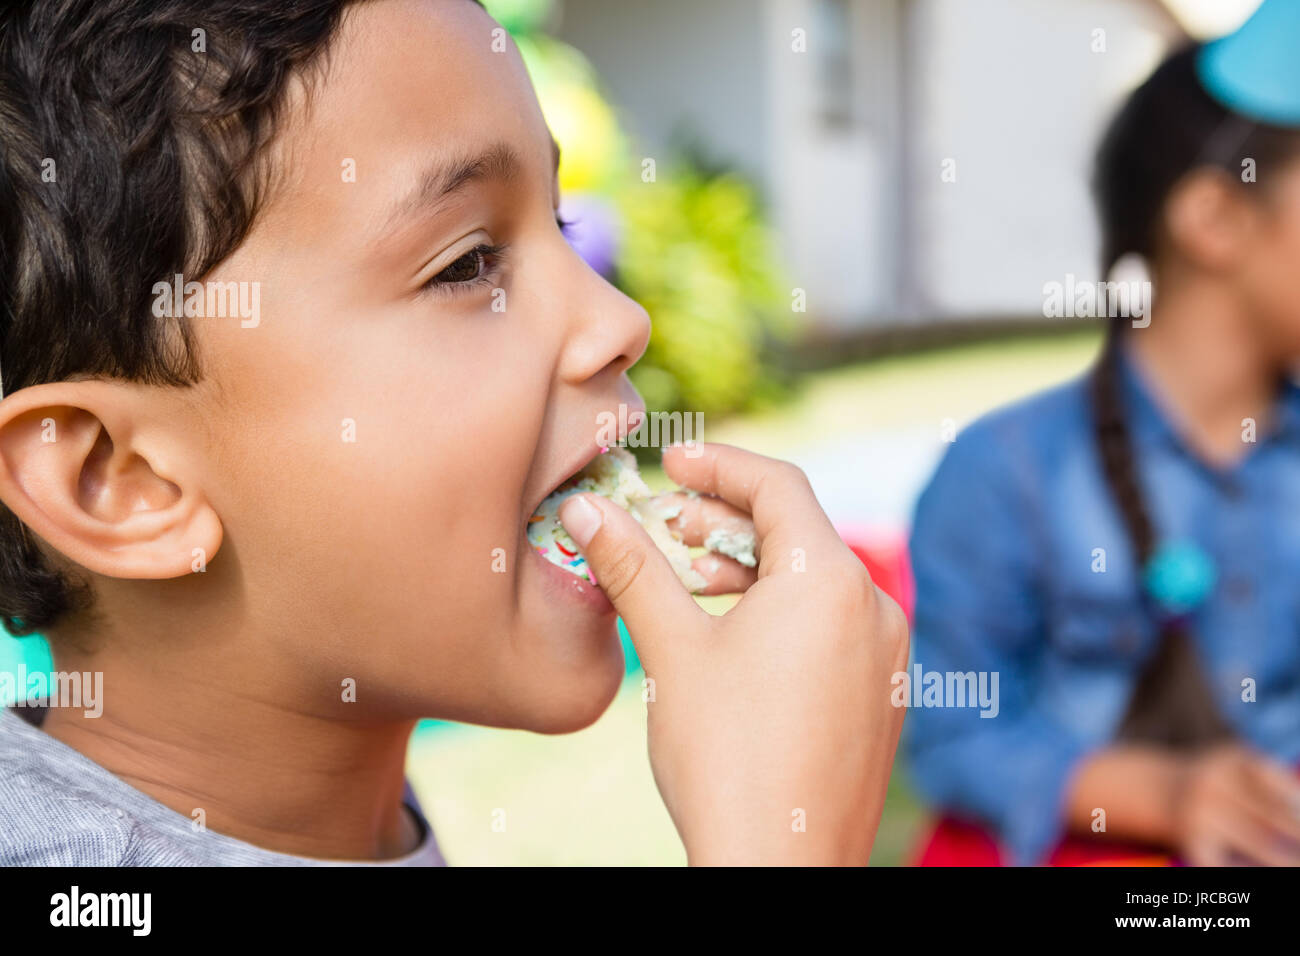 Close up of boy eating cake with friend in background during birthday party Stock Photo